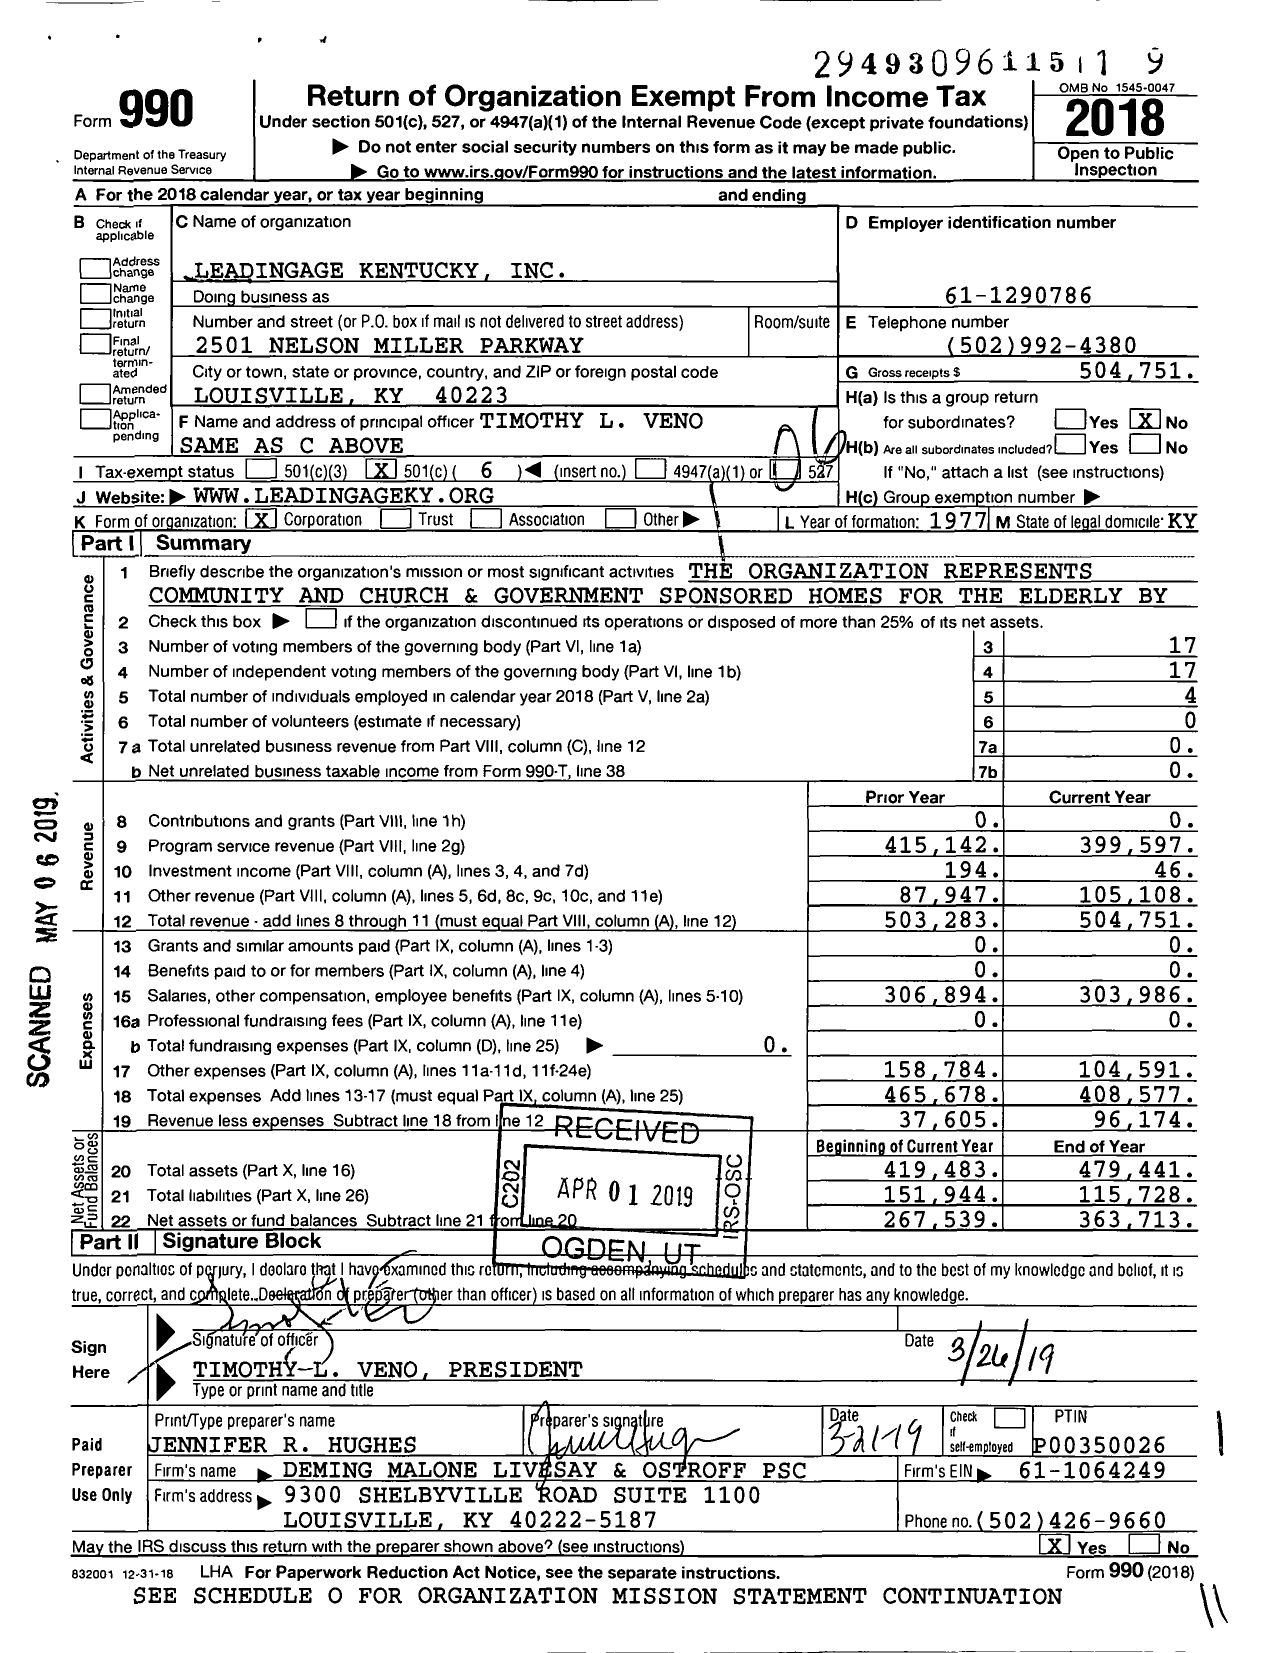 Image of first page of 2018 Form 990O for Leadingage Kentucky